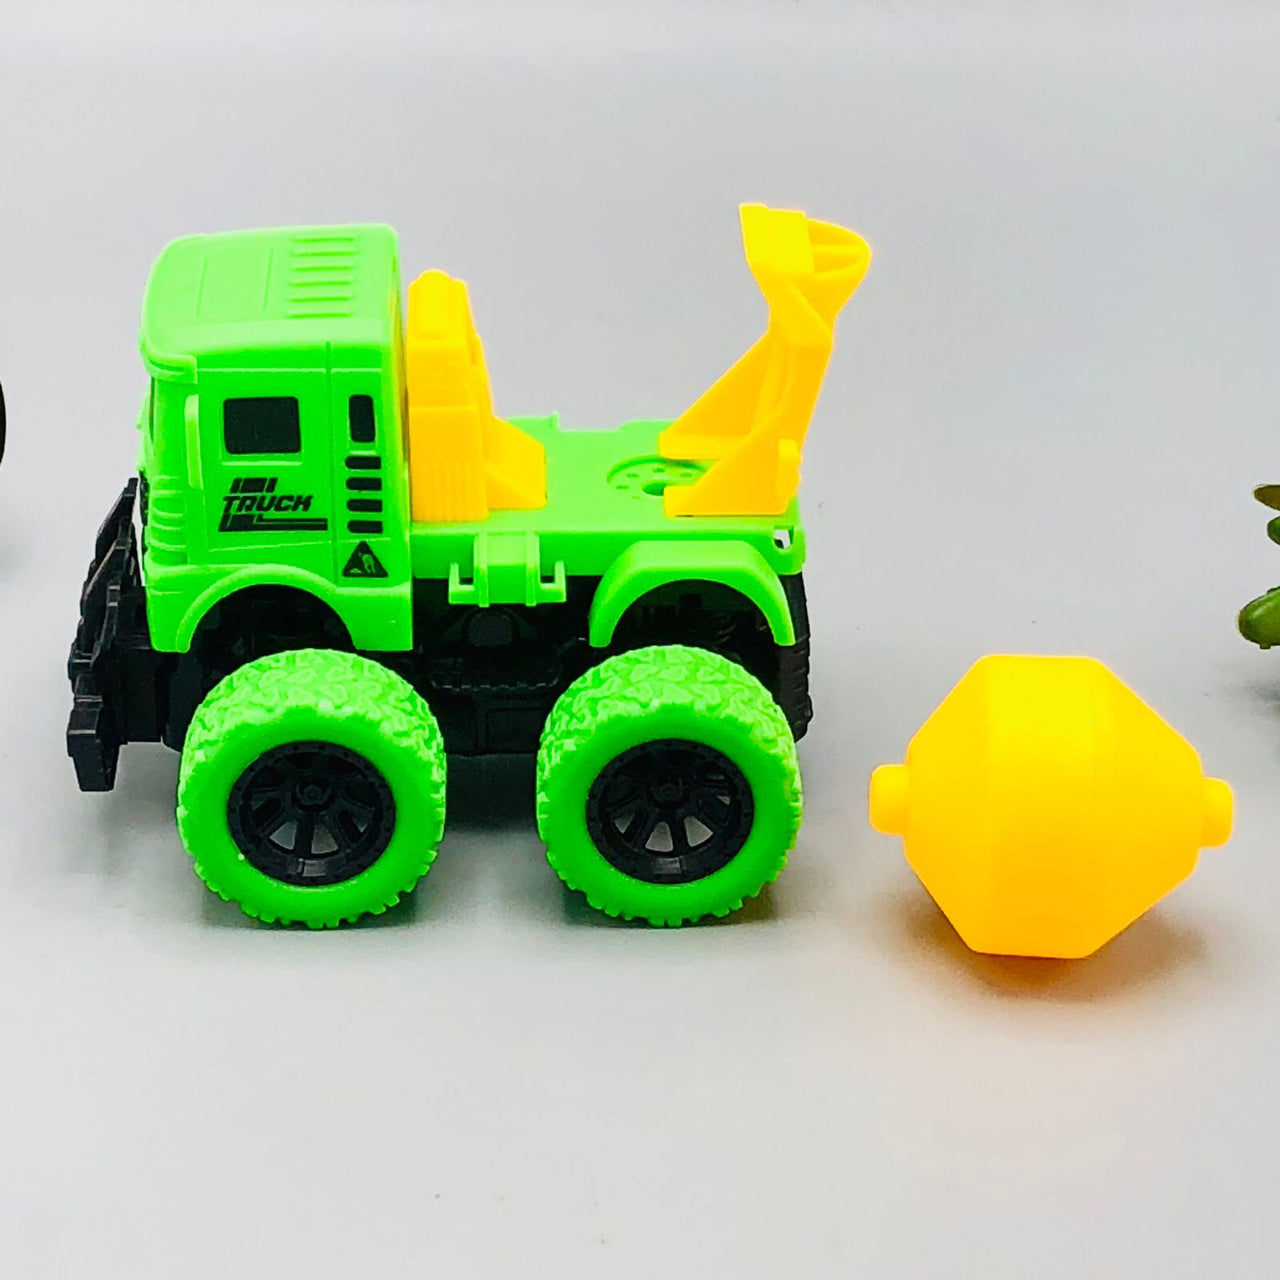 ABS Friction Engineering Truck - Assortment